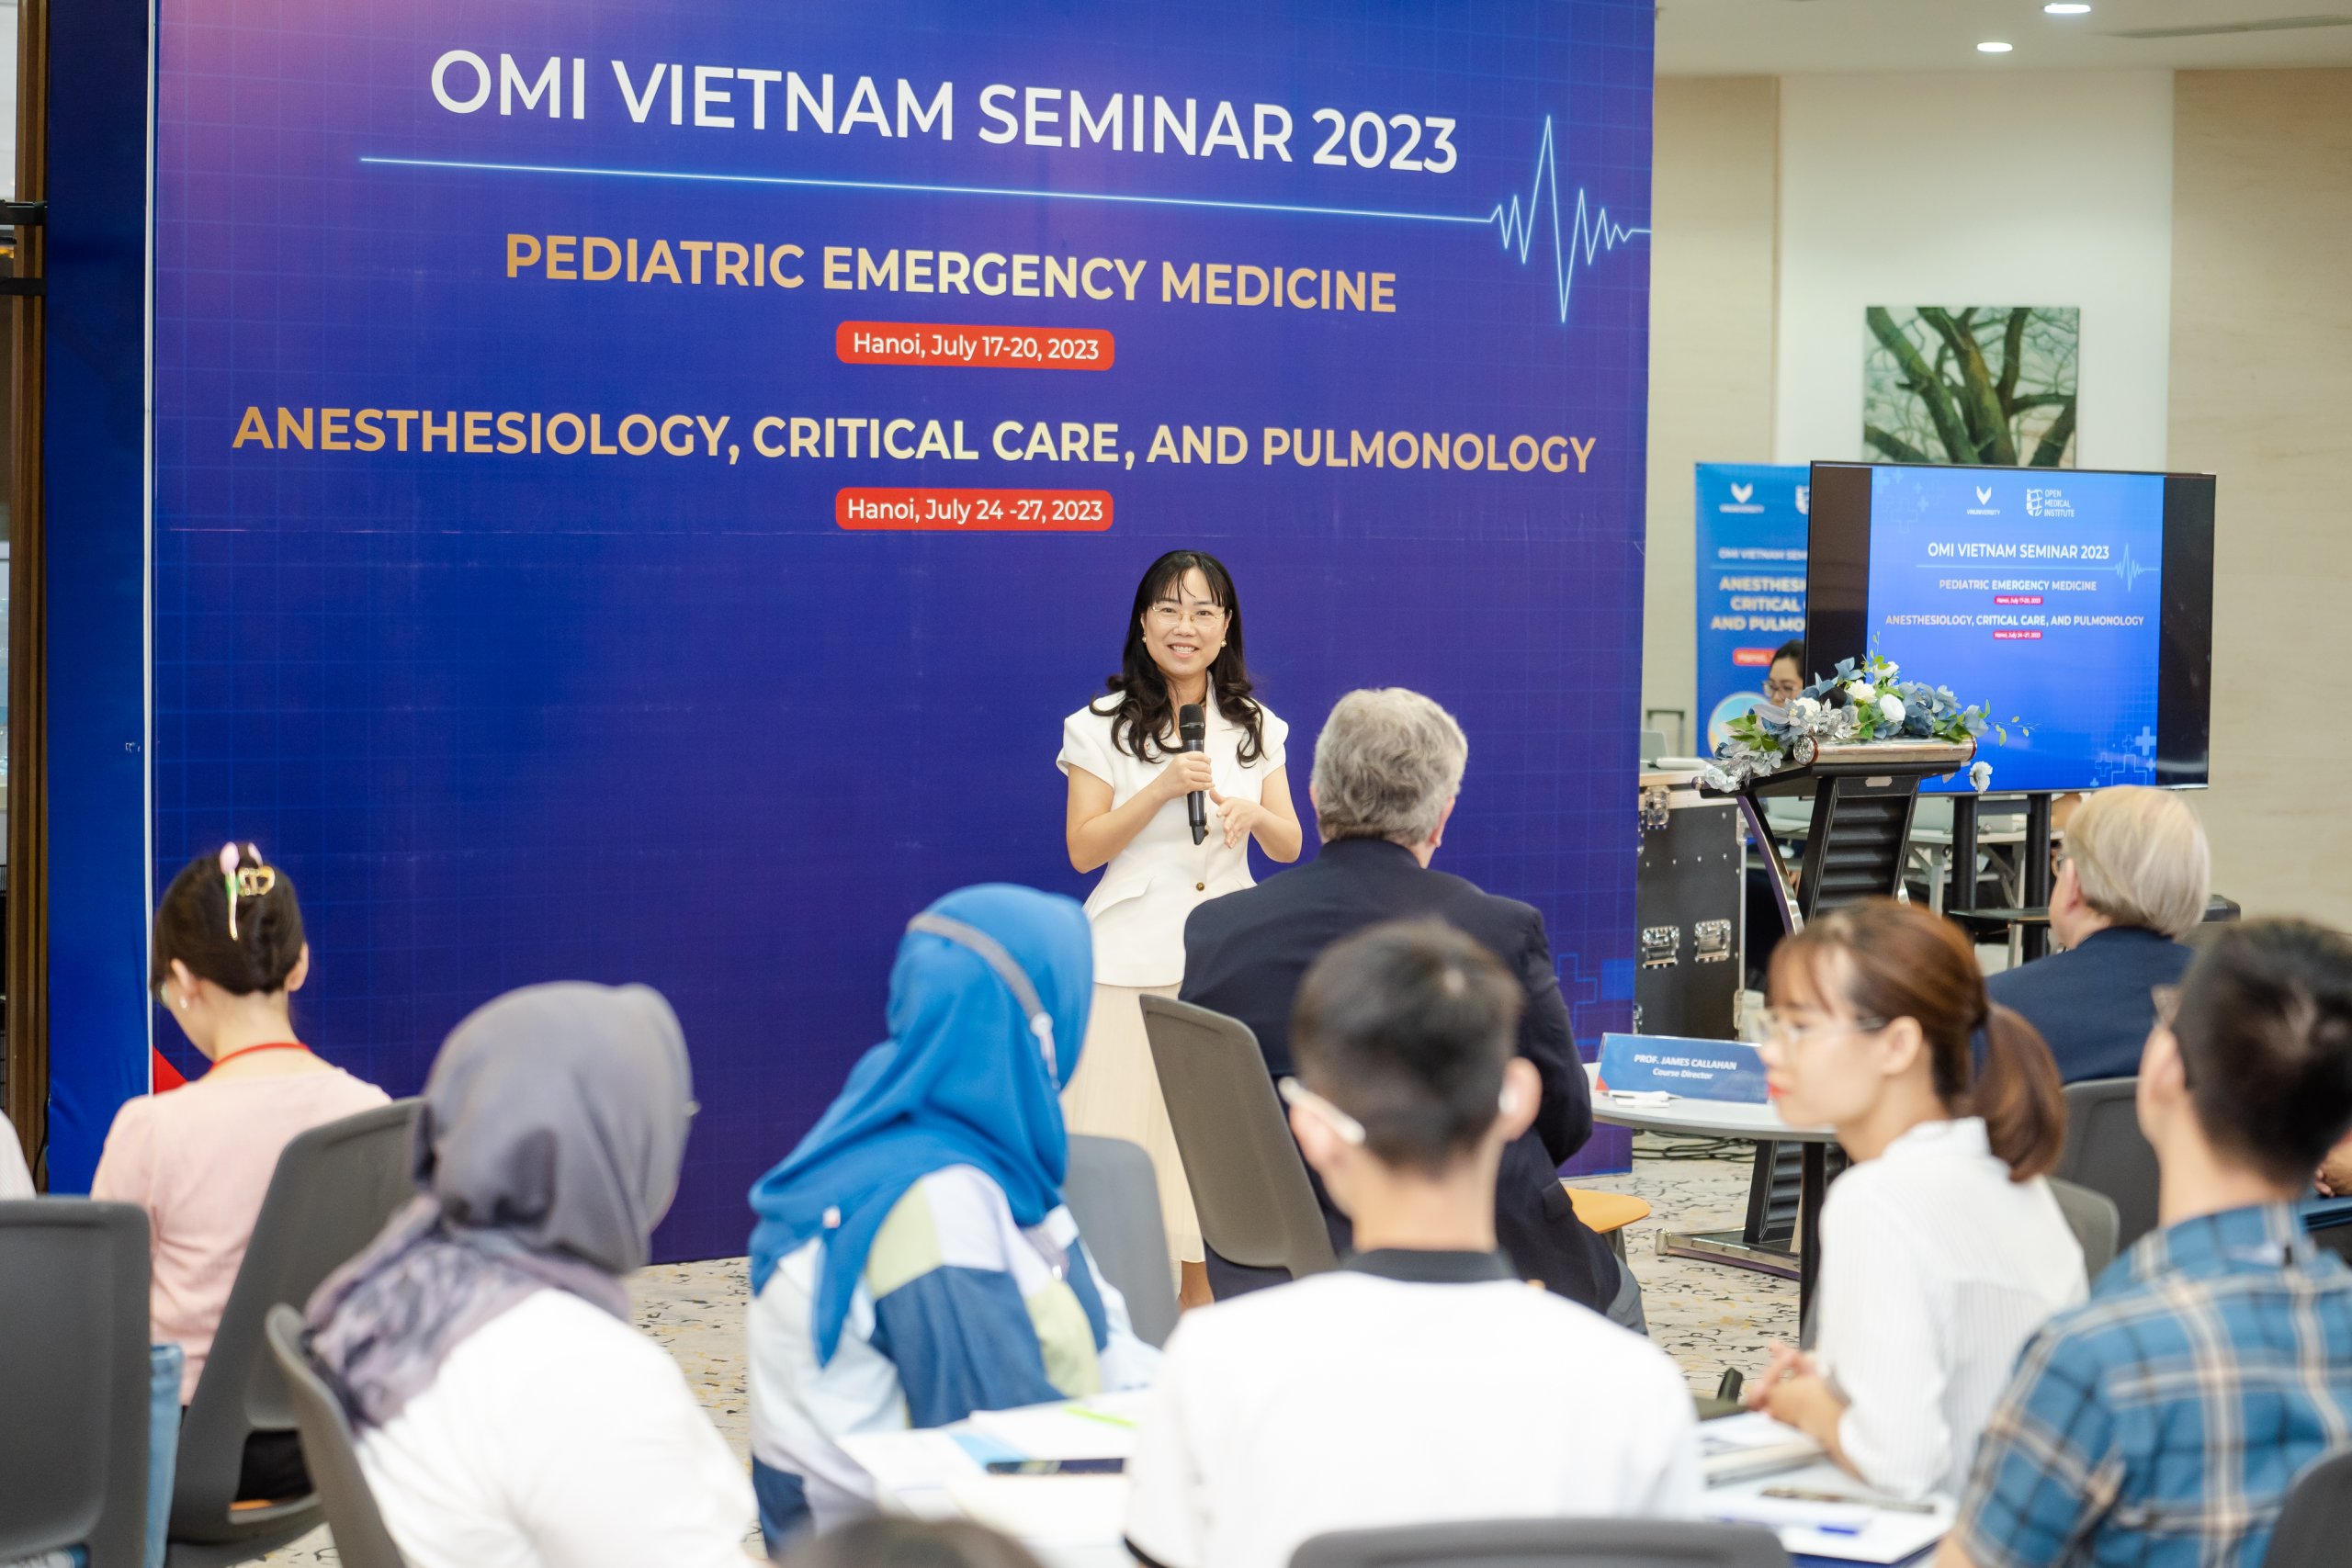 Dr. Le Mai Lan, Vice Chairwoman of the Vingroup Vice Chairwoman of Vingroup JSC and President of the VinUniversity Council, cordially welcoming faculty and fellows to the first OMI Vietnam seminar